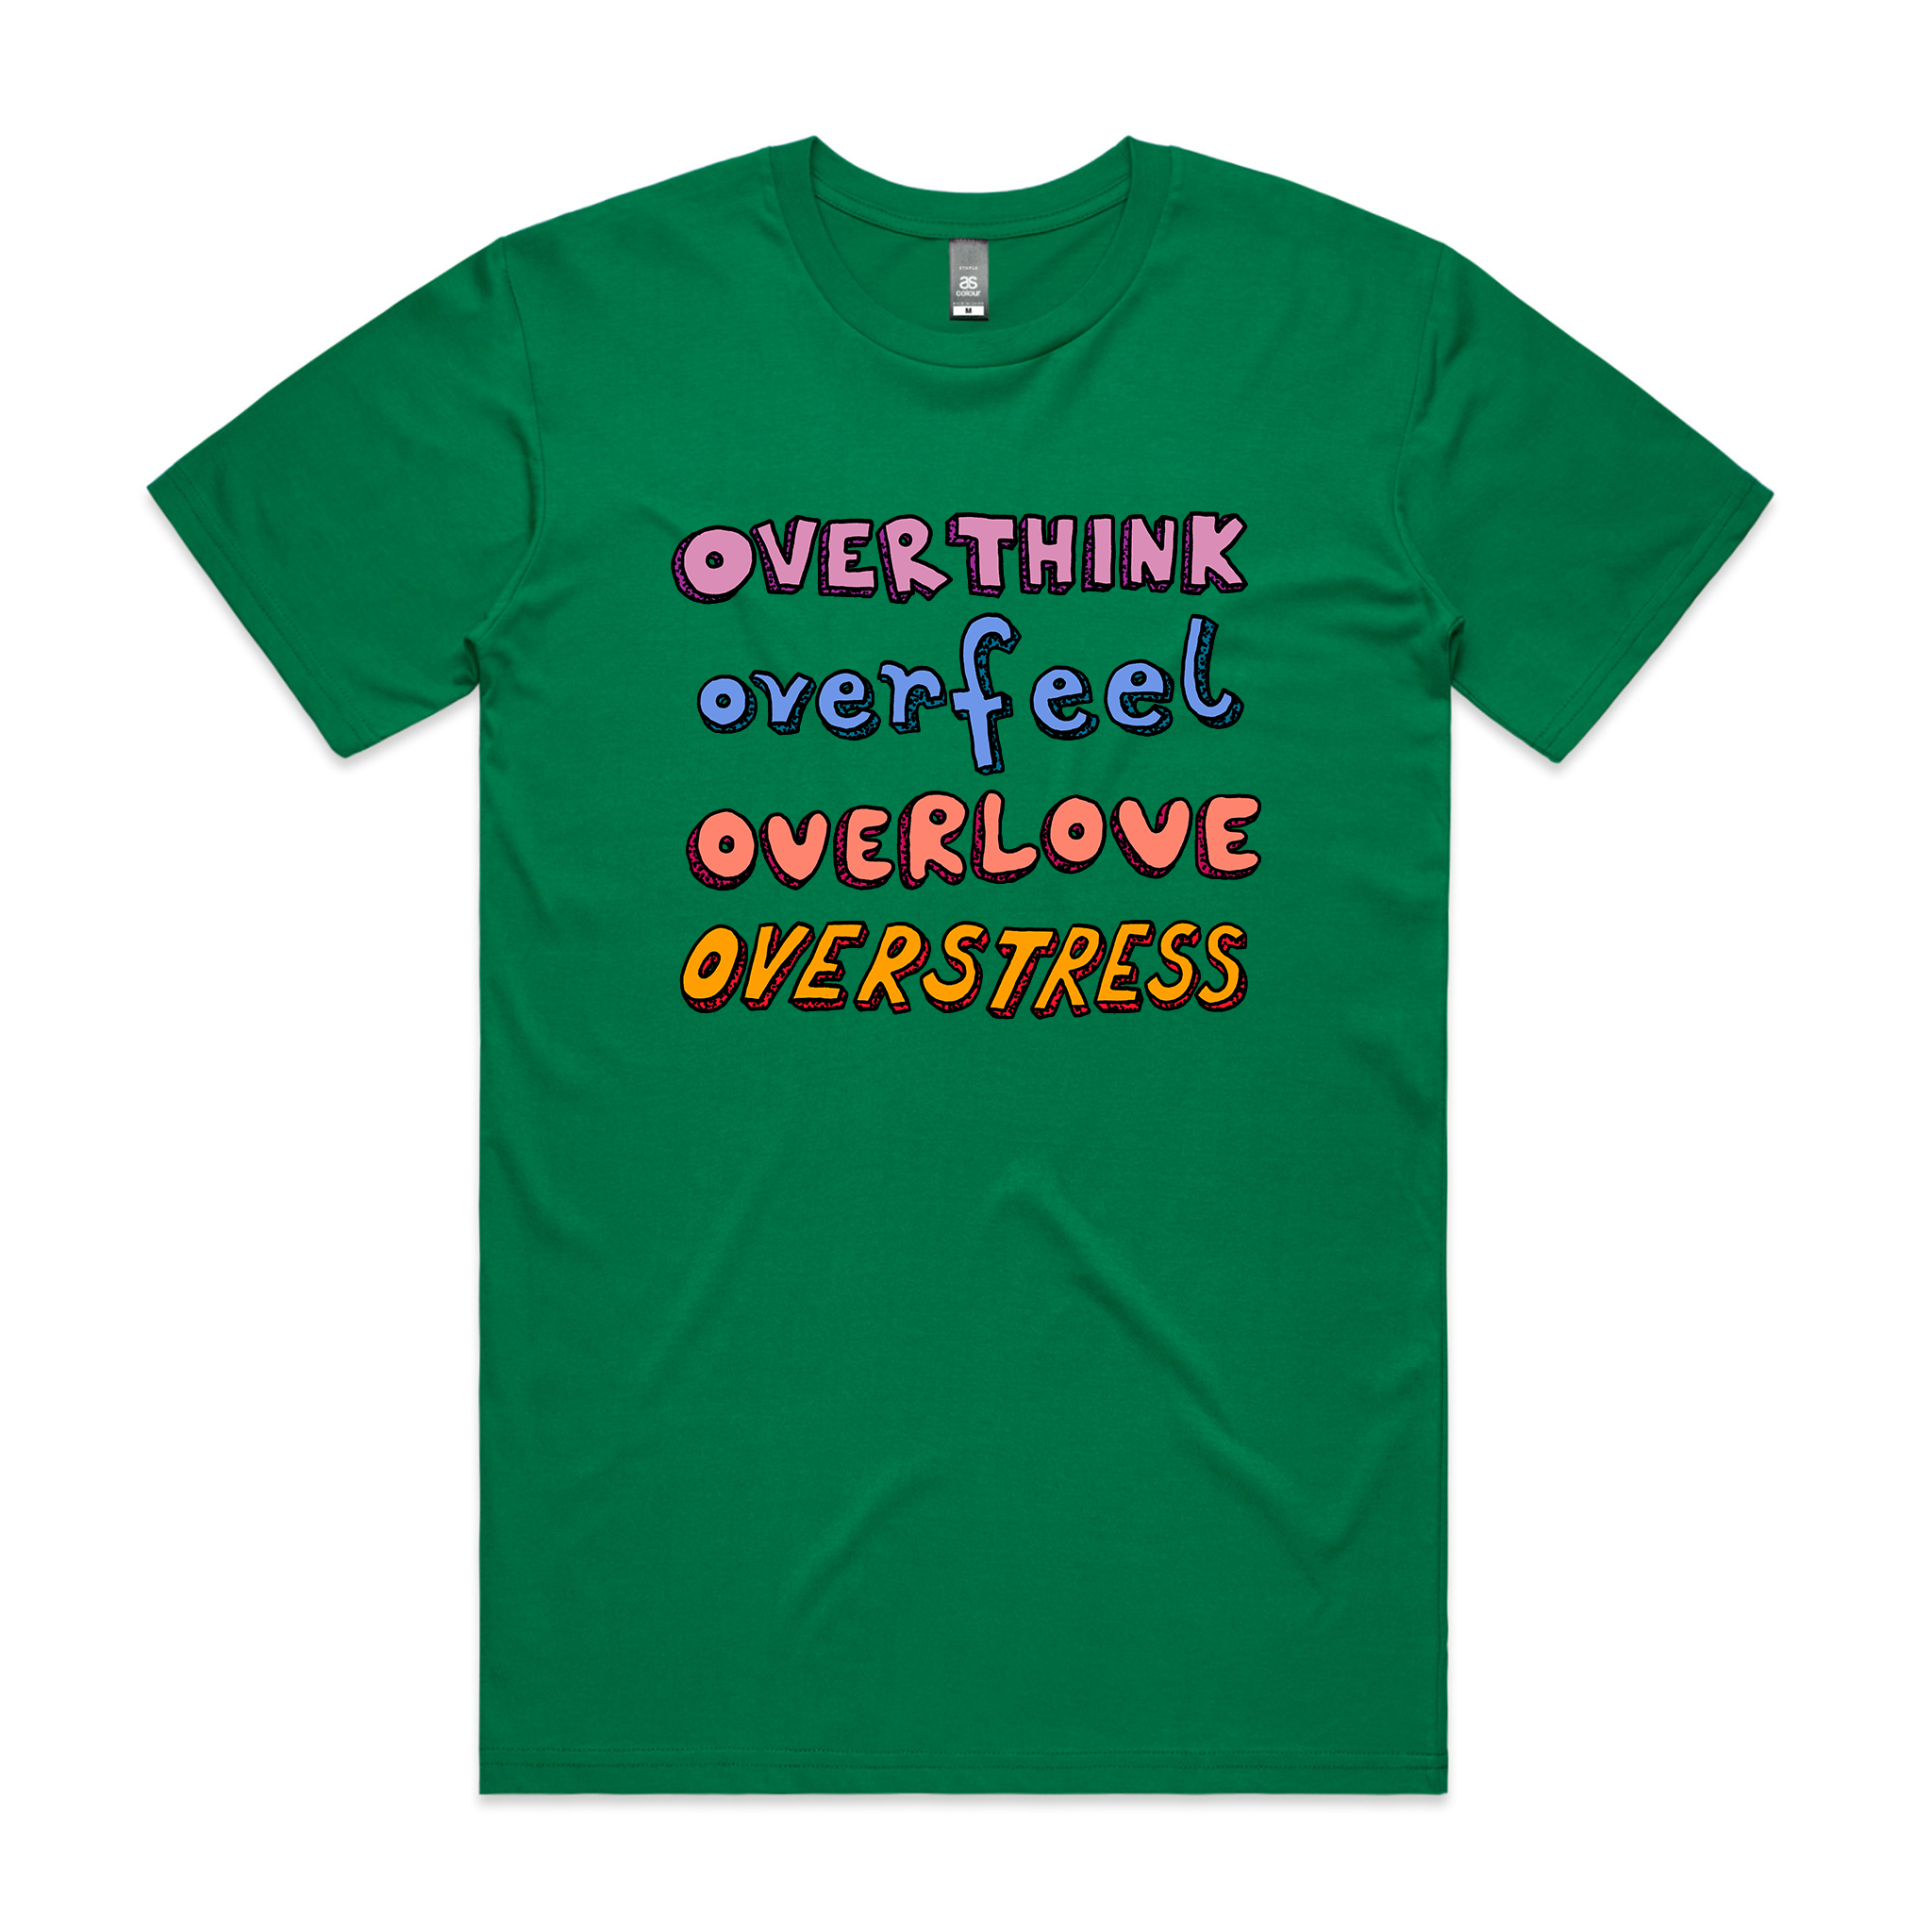 Over Everything Tee